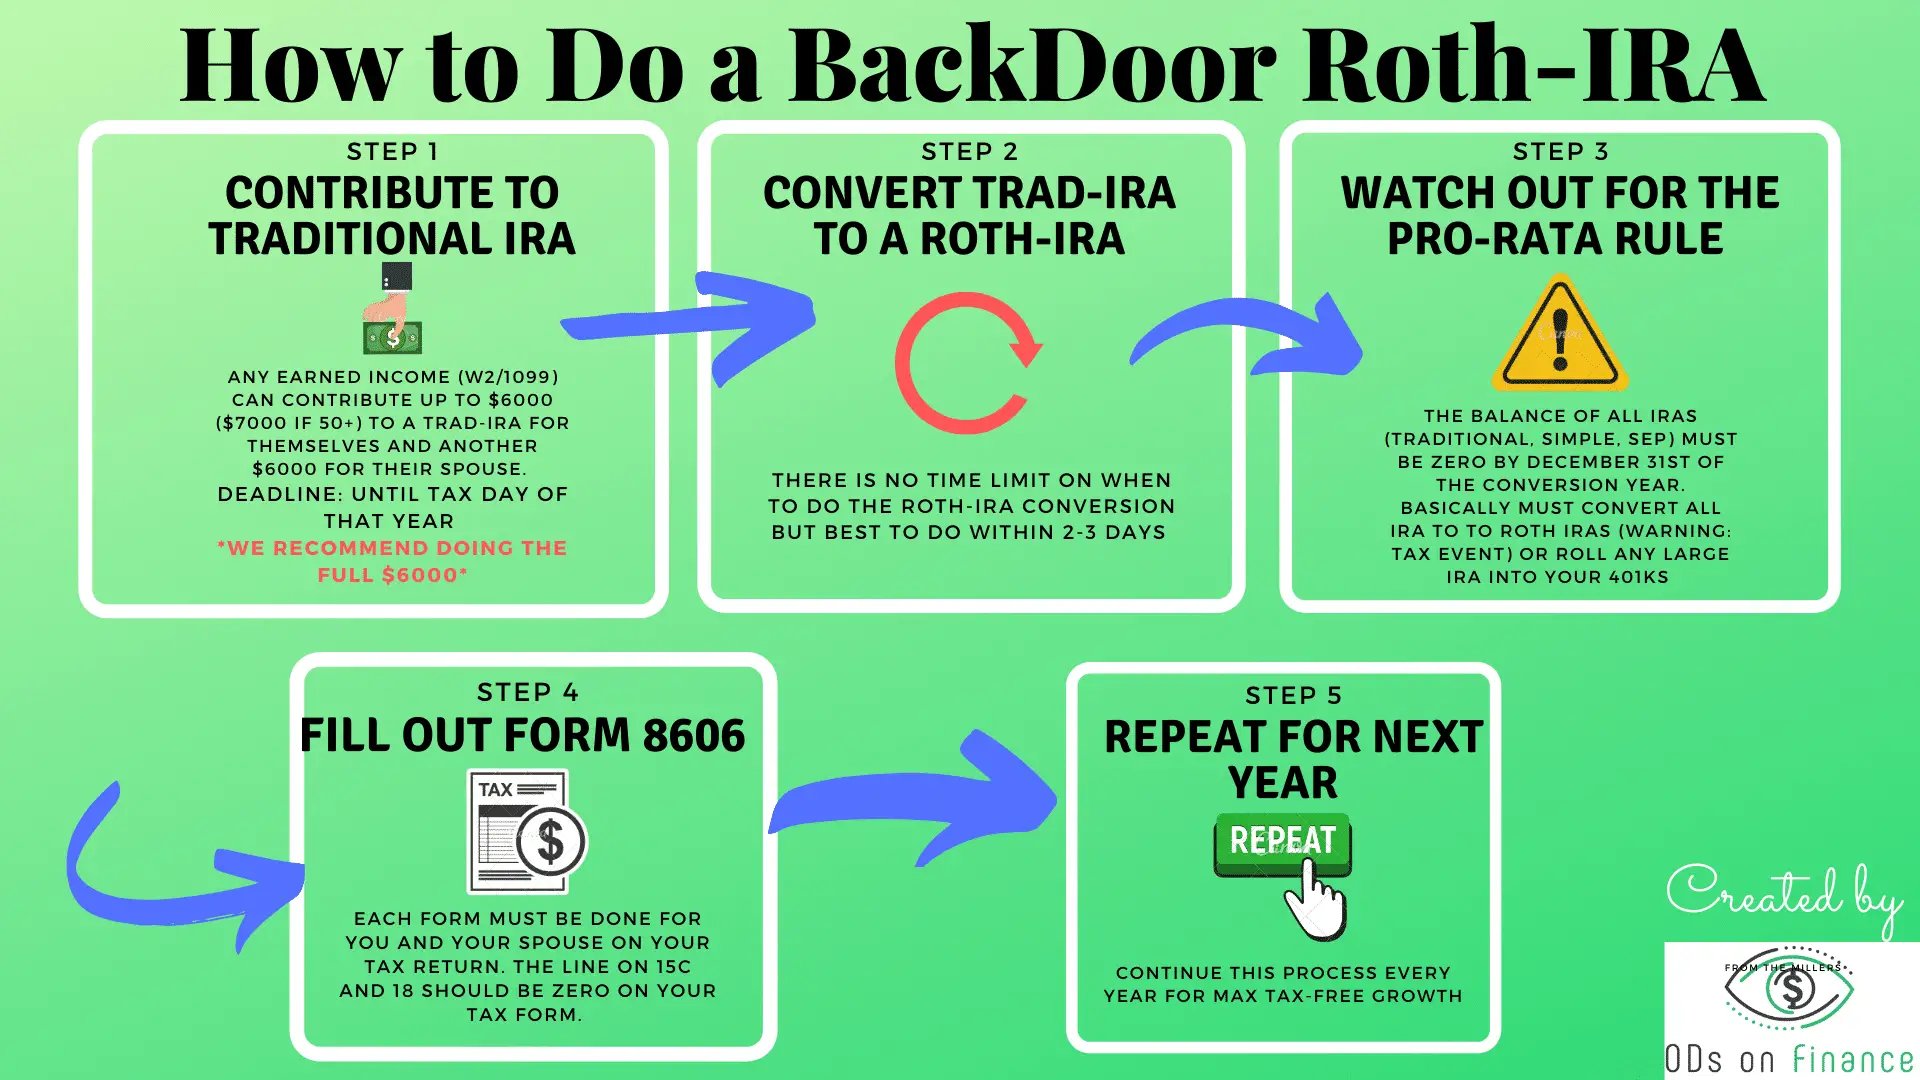 How to do BackDoor Roth IRA